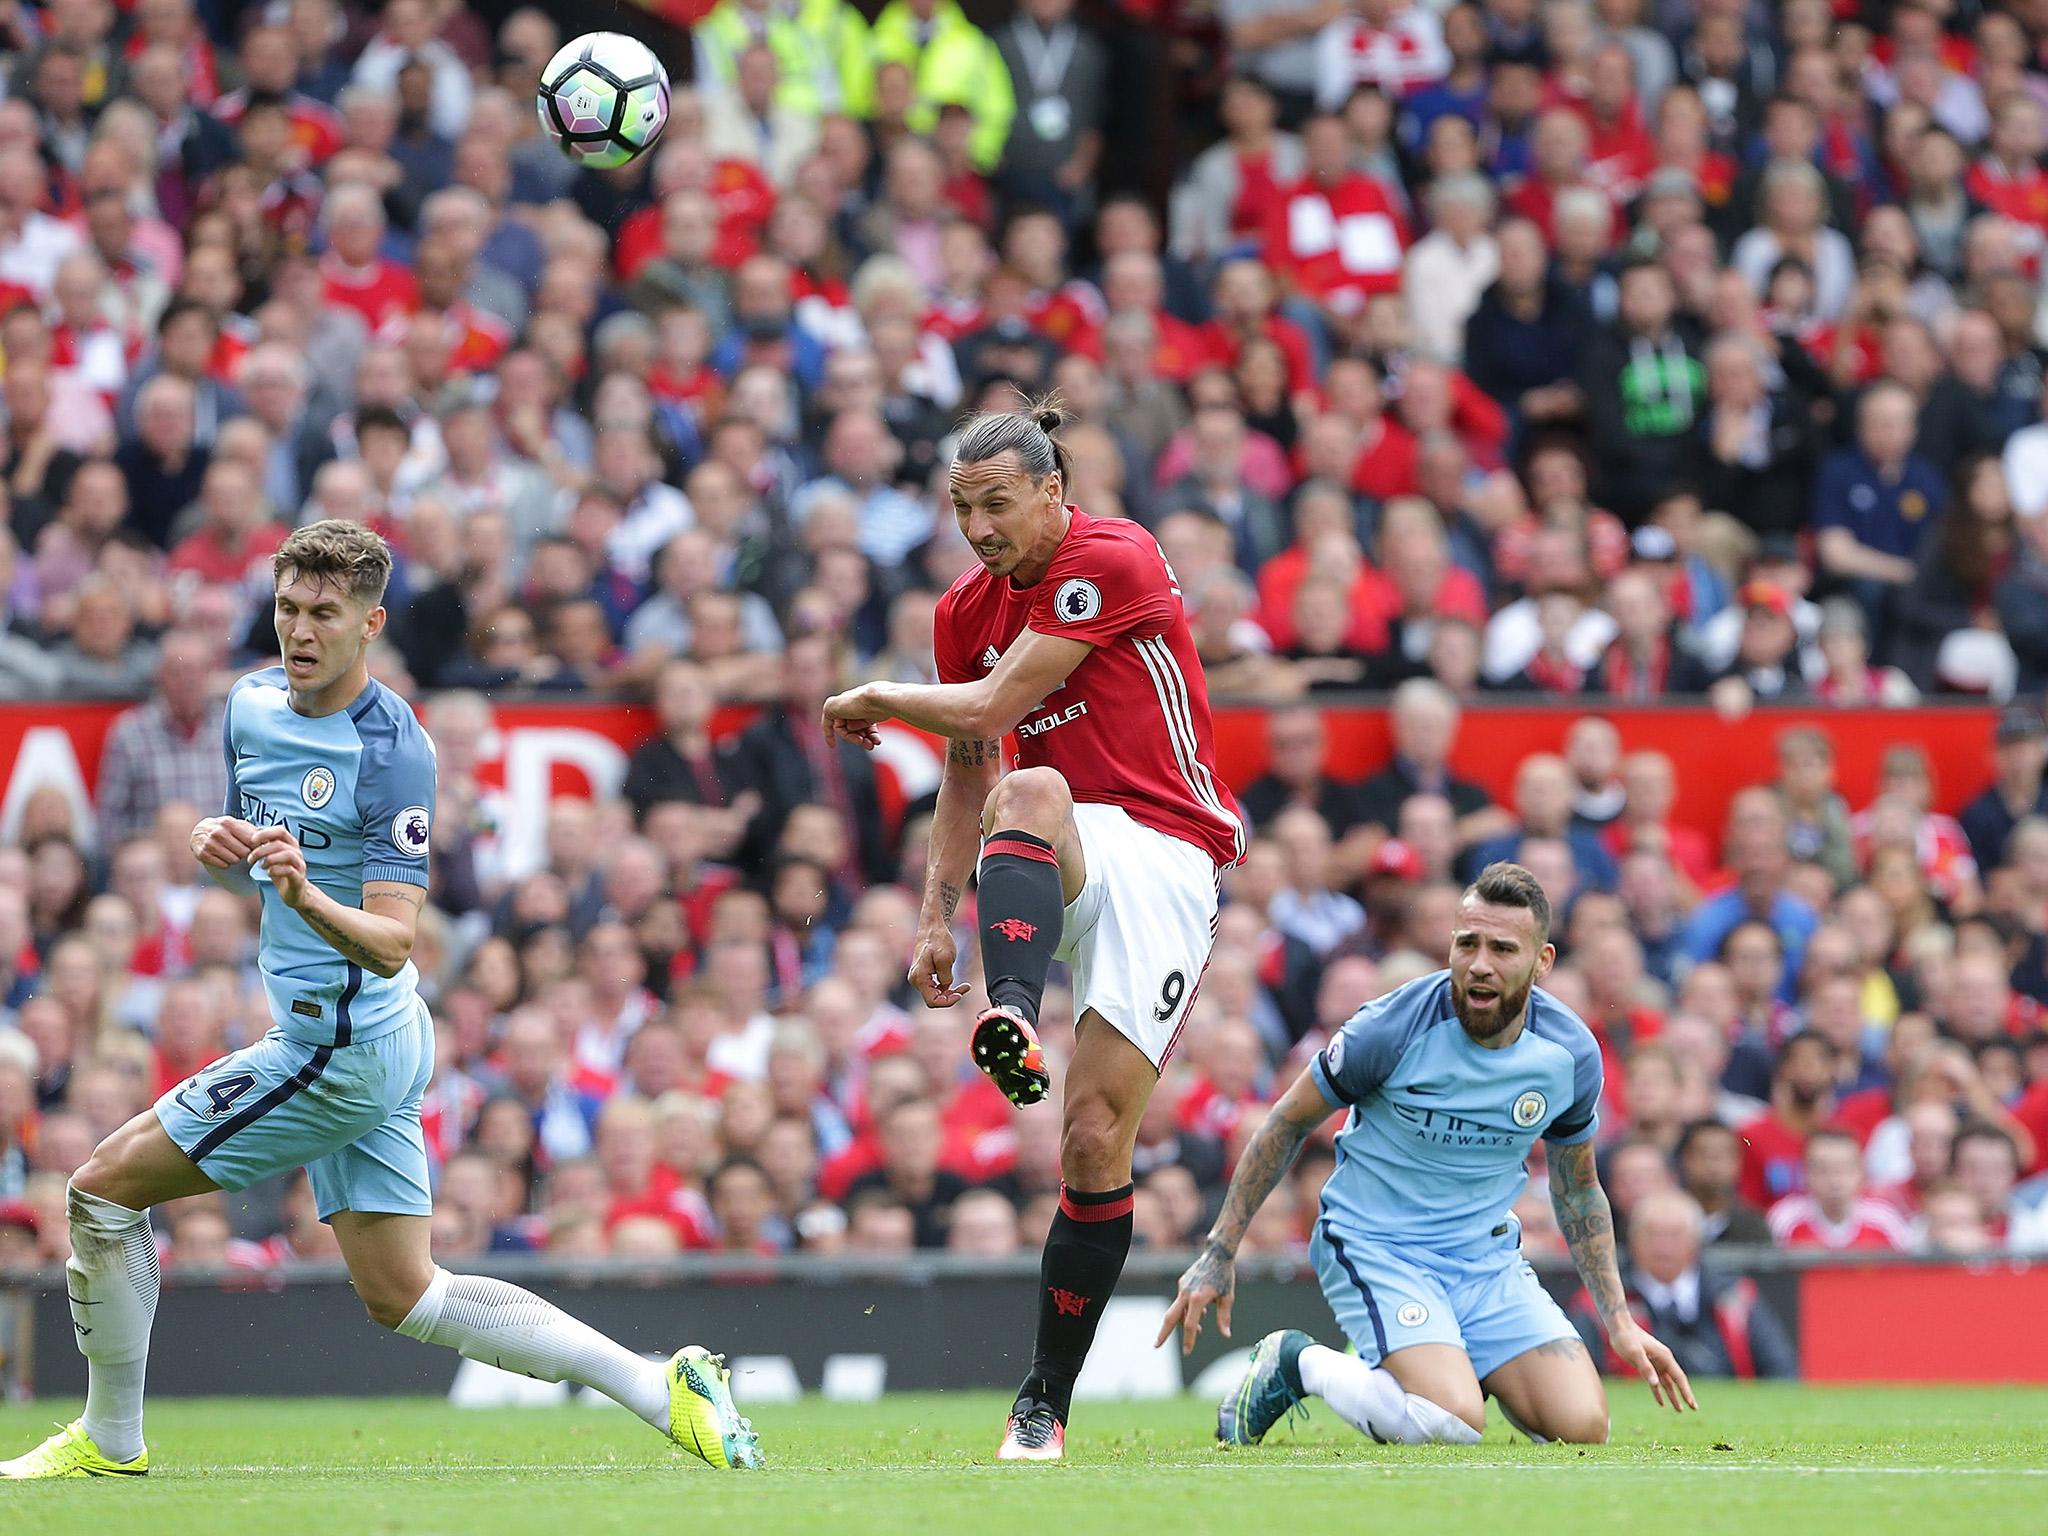 Zlatan Ibrahimovic wants Manchester United to make up for their defeat by Manchester City